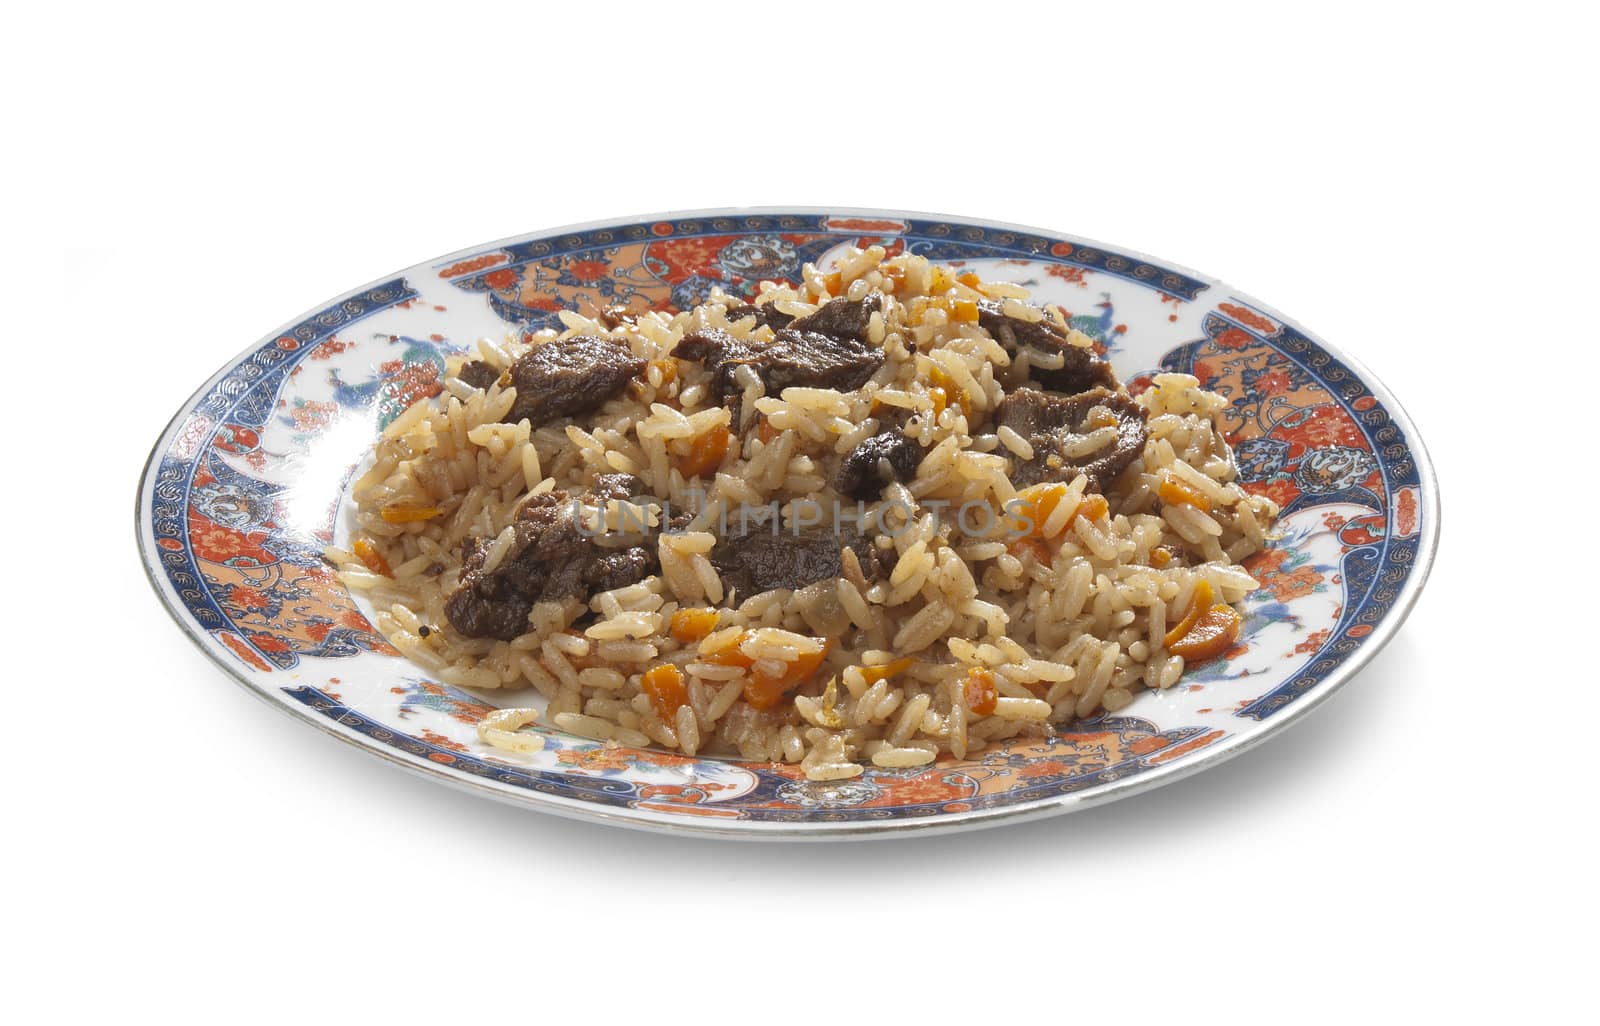 Pilau in plate by Angorius